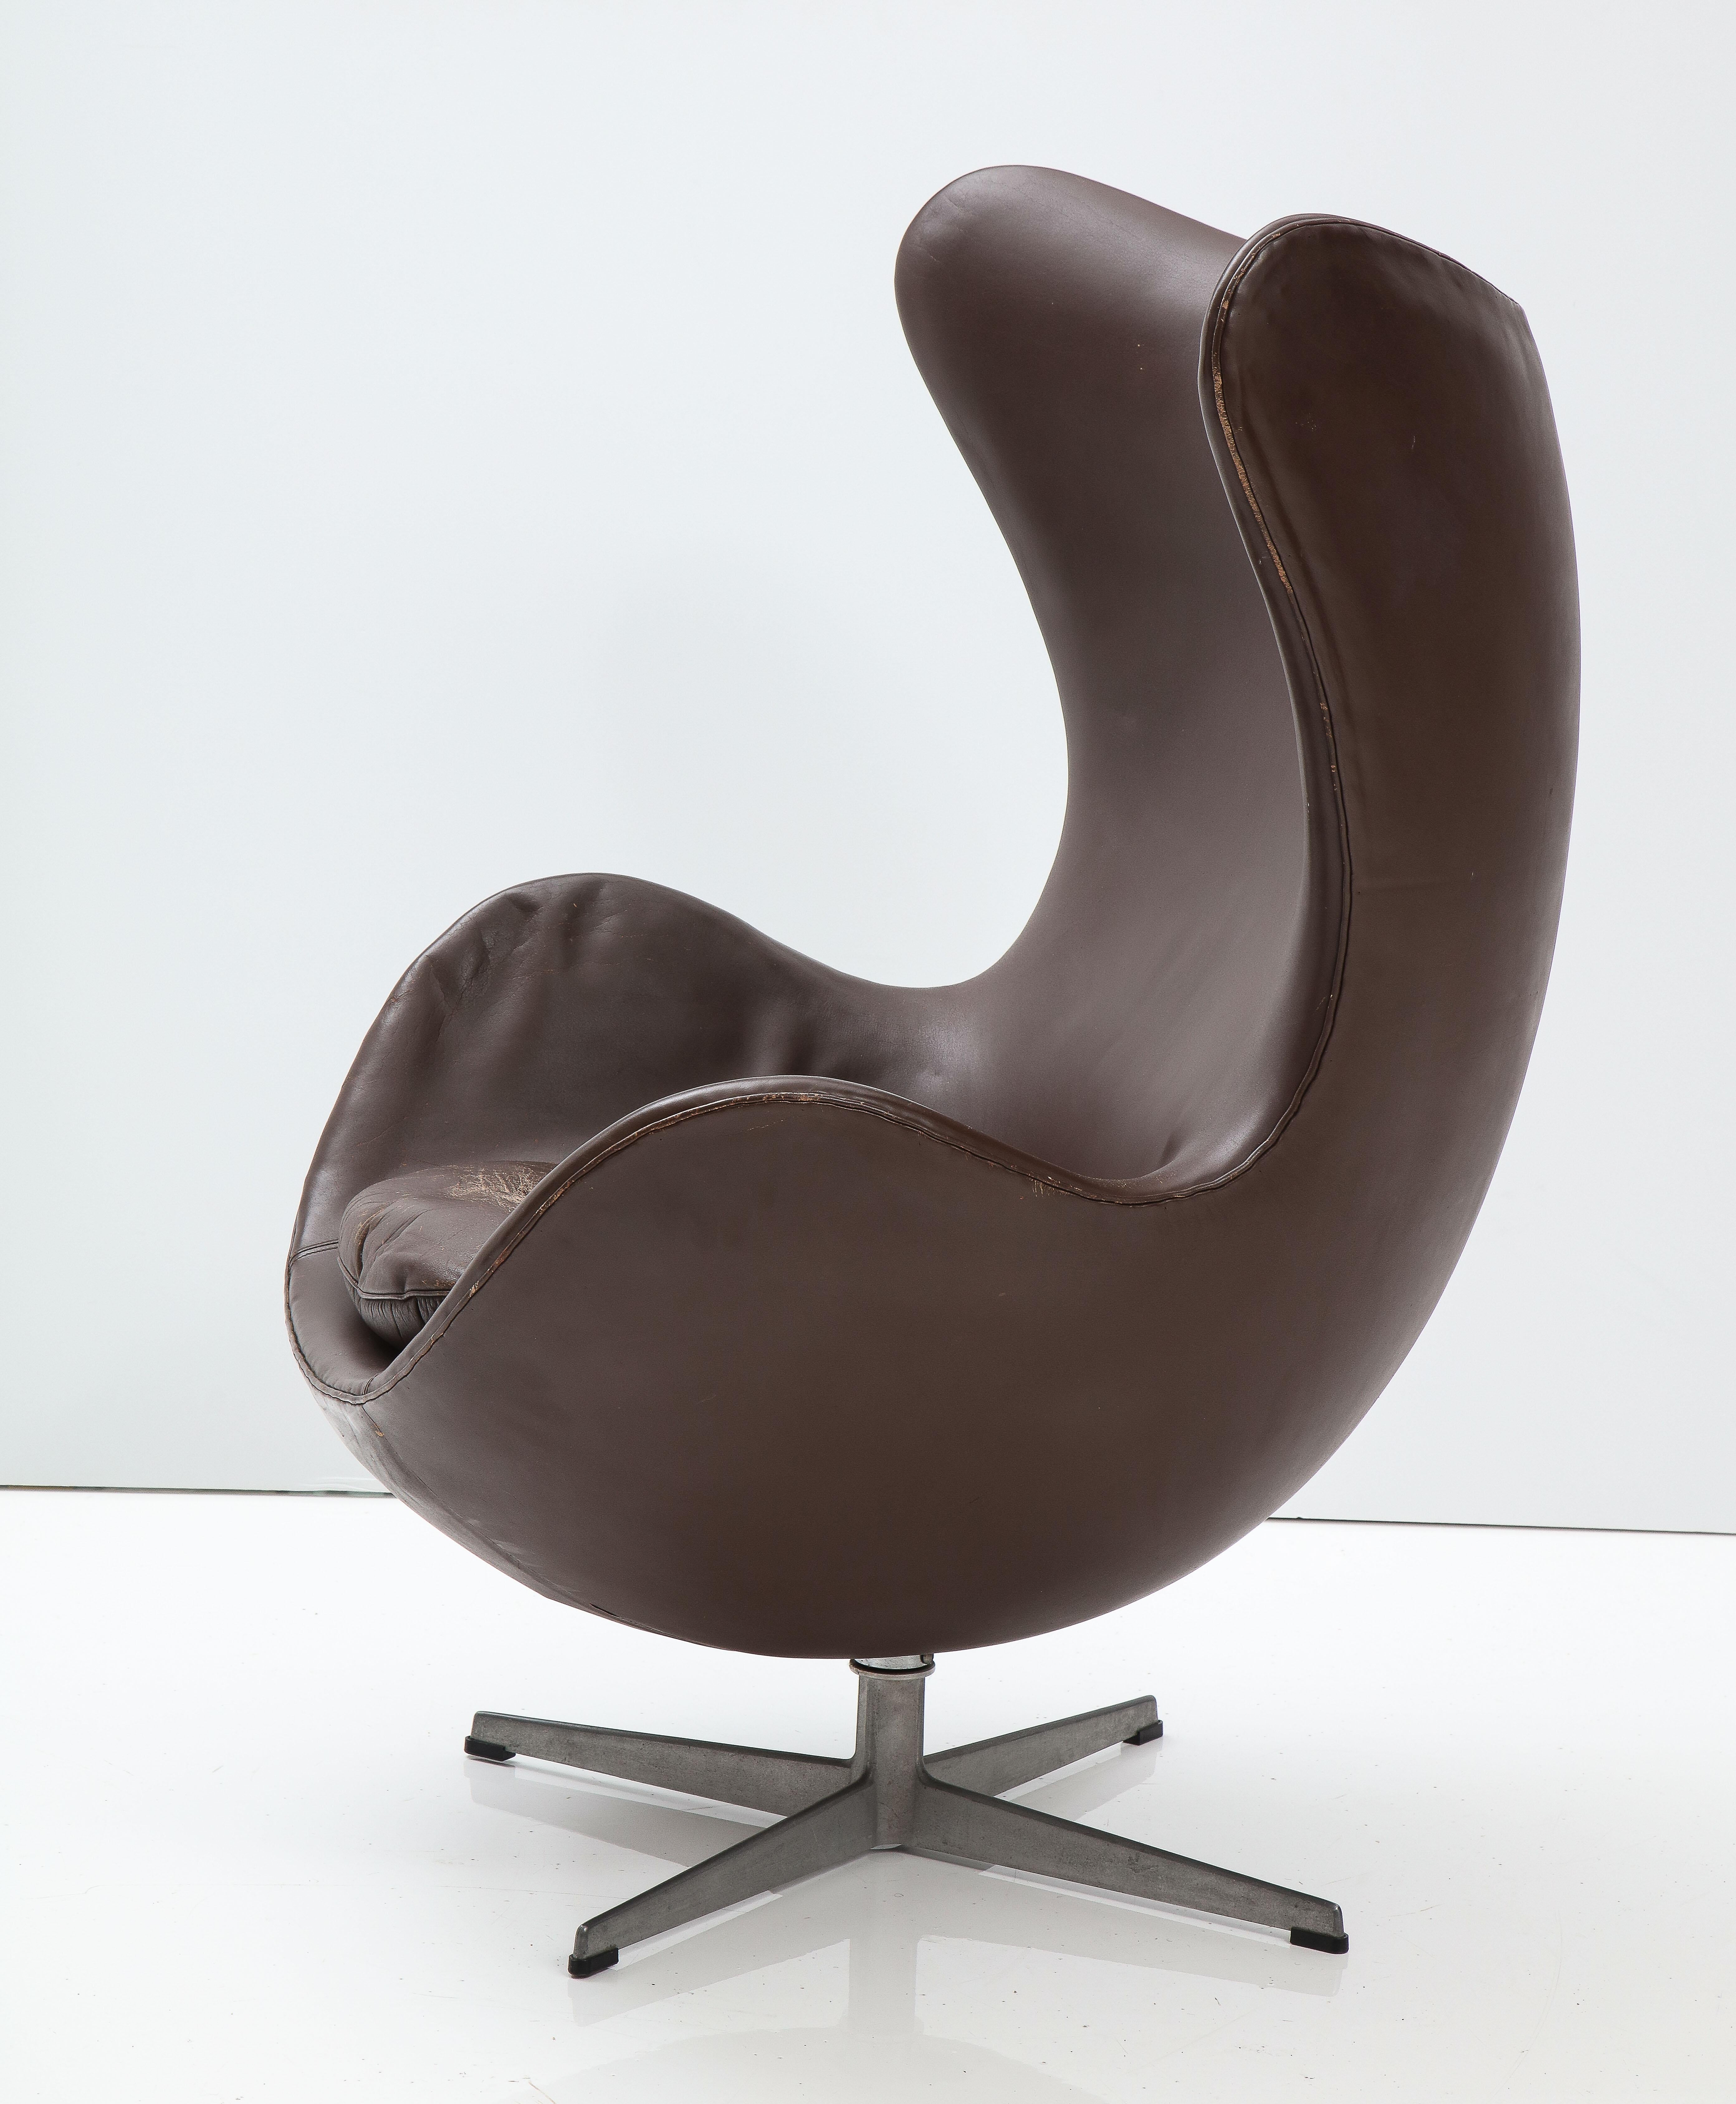 Aluminum Arne Jacobson 'Egg' Chair and Ottoman, Original Leather for Fritz Hansen, 1976 For Sale